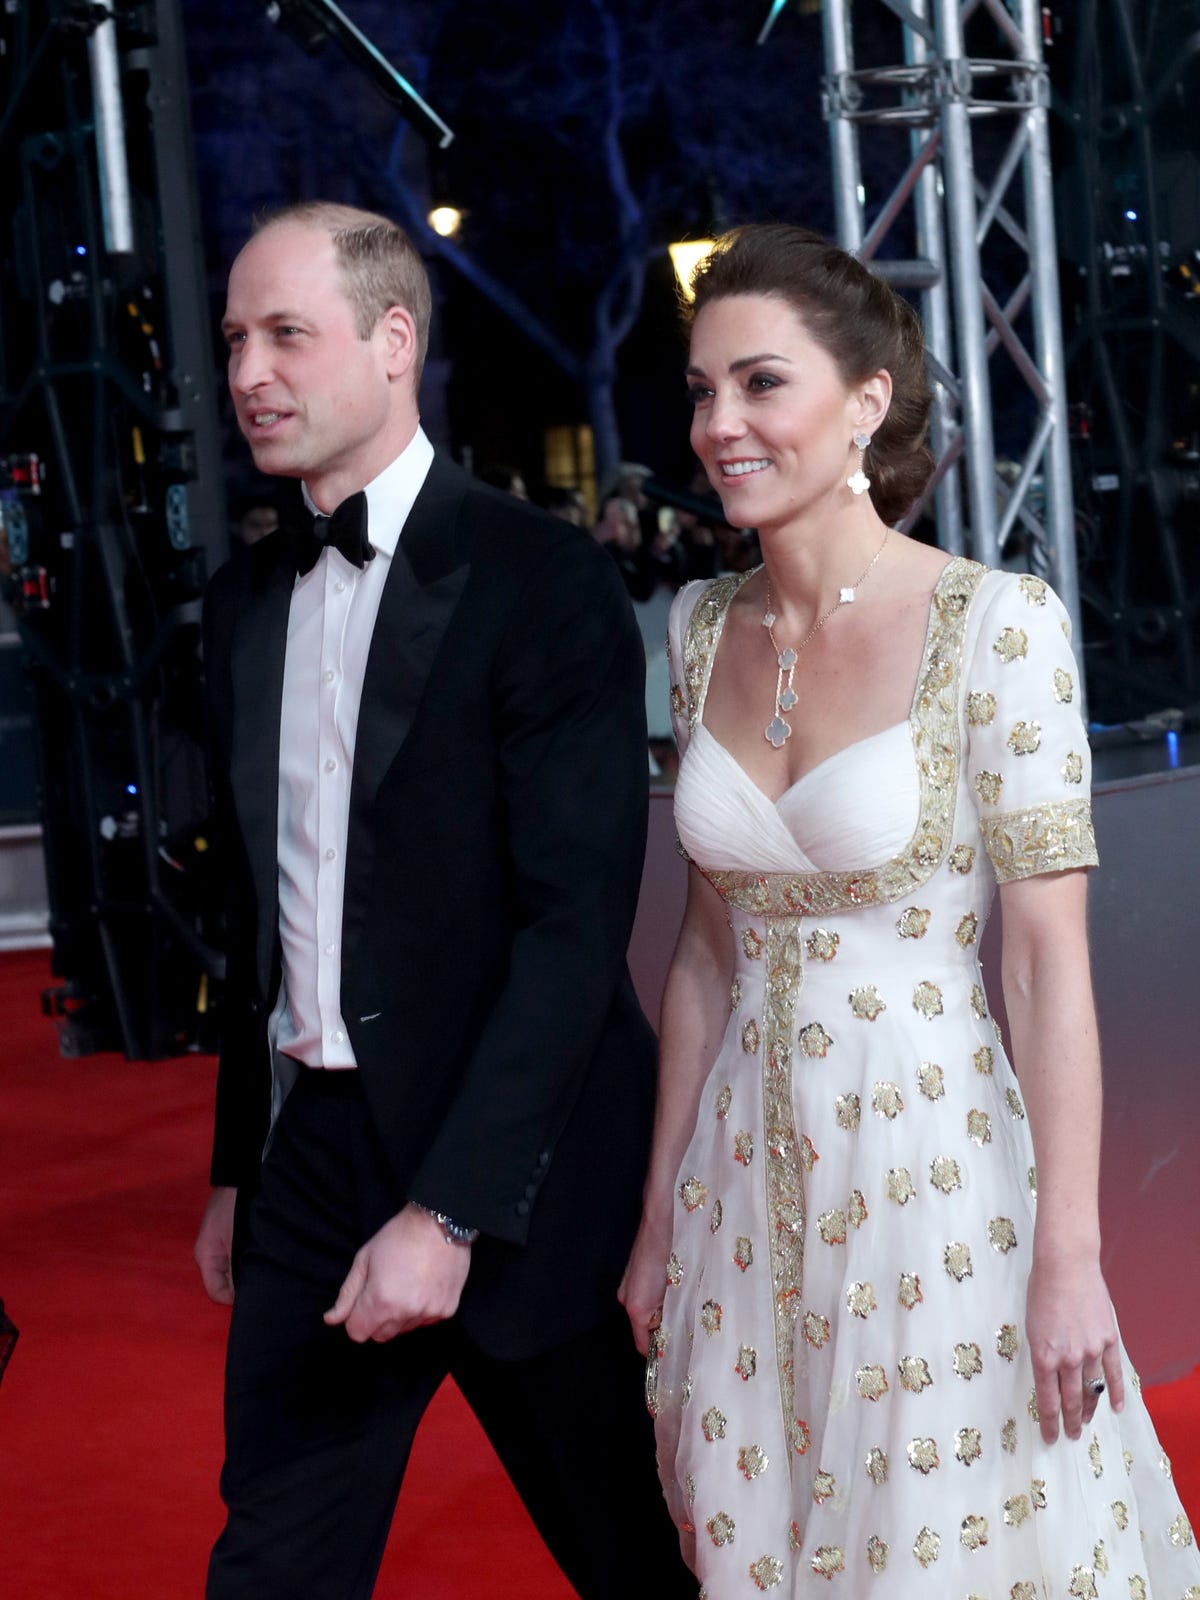 Why Prince William & Kate Middleton at the 2022 BAFTAs